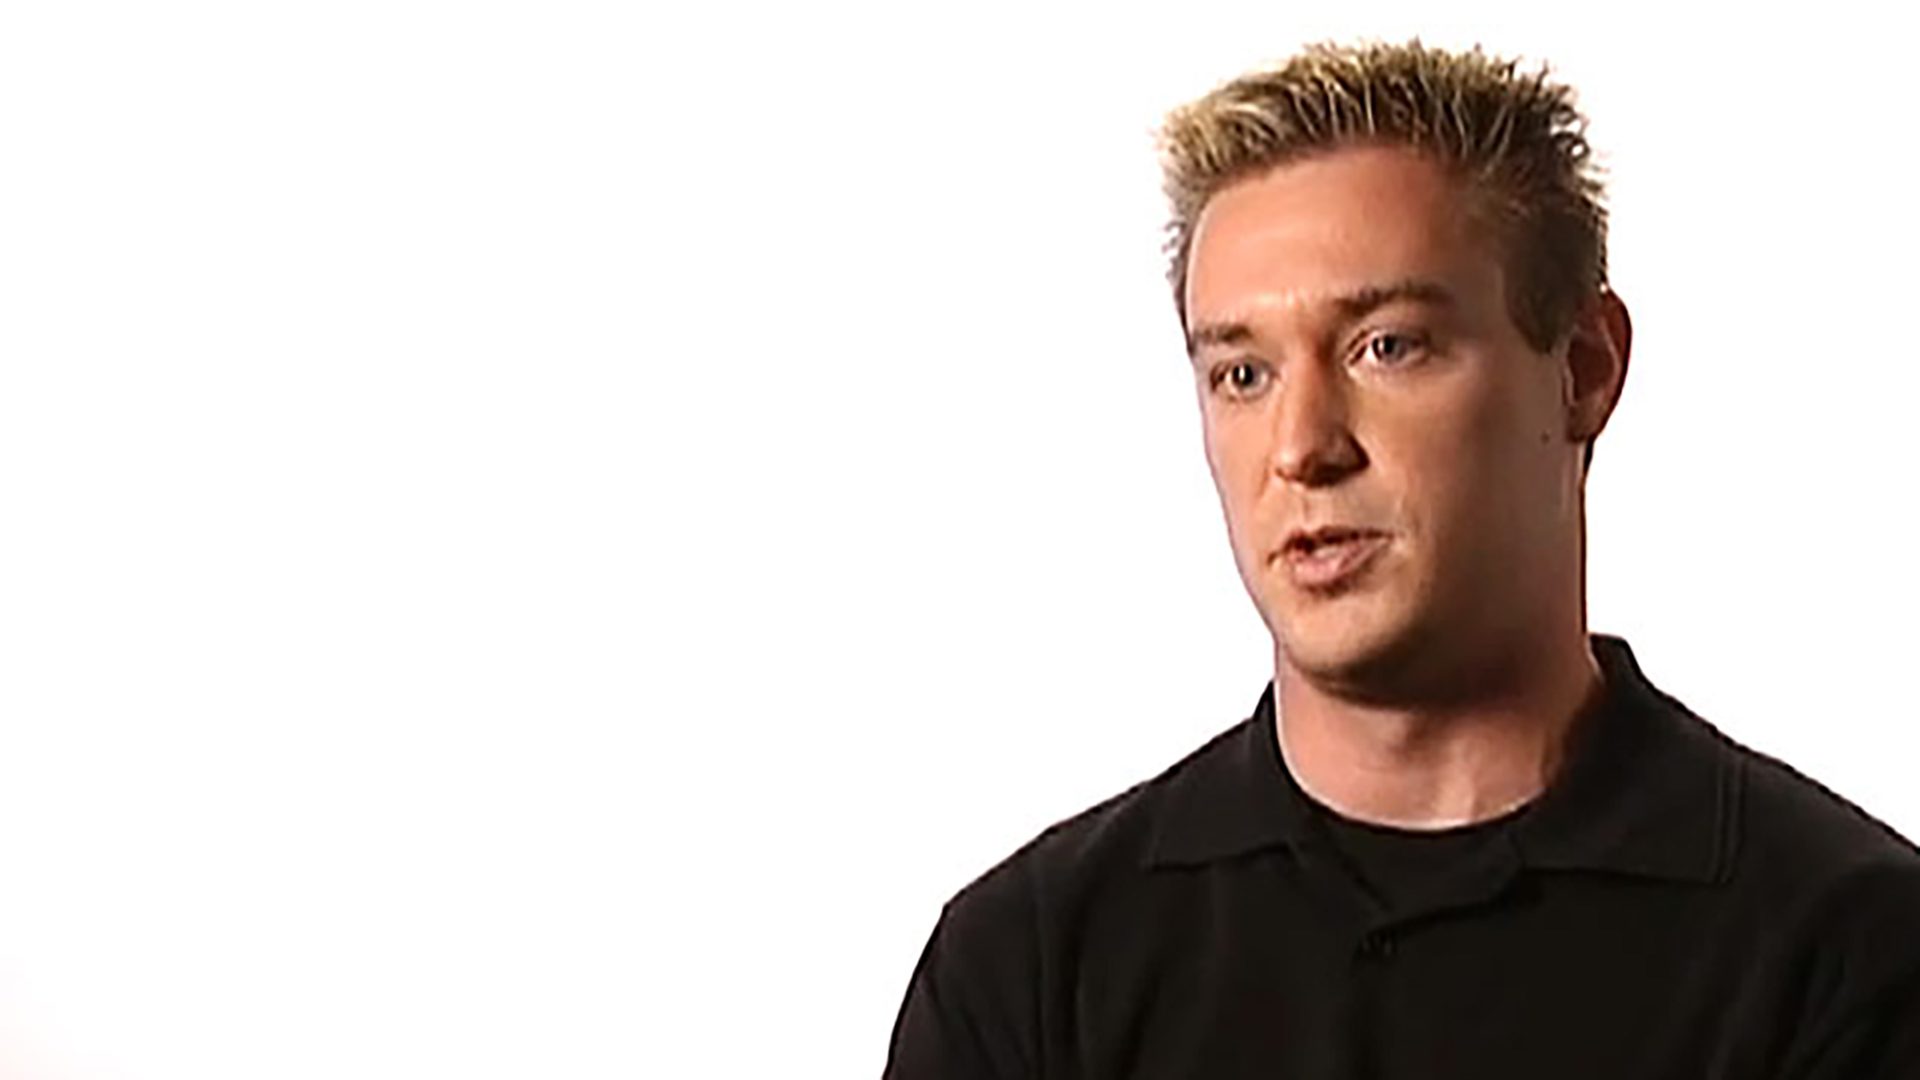 A man with spiked blond hair and a black shirt is interviewed against a white background